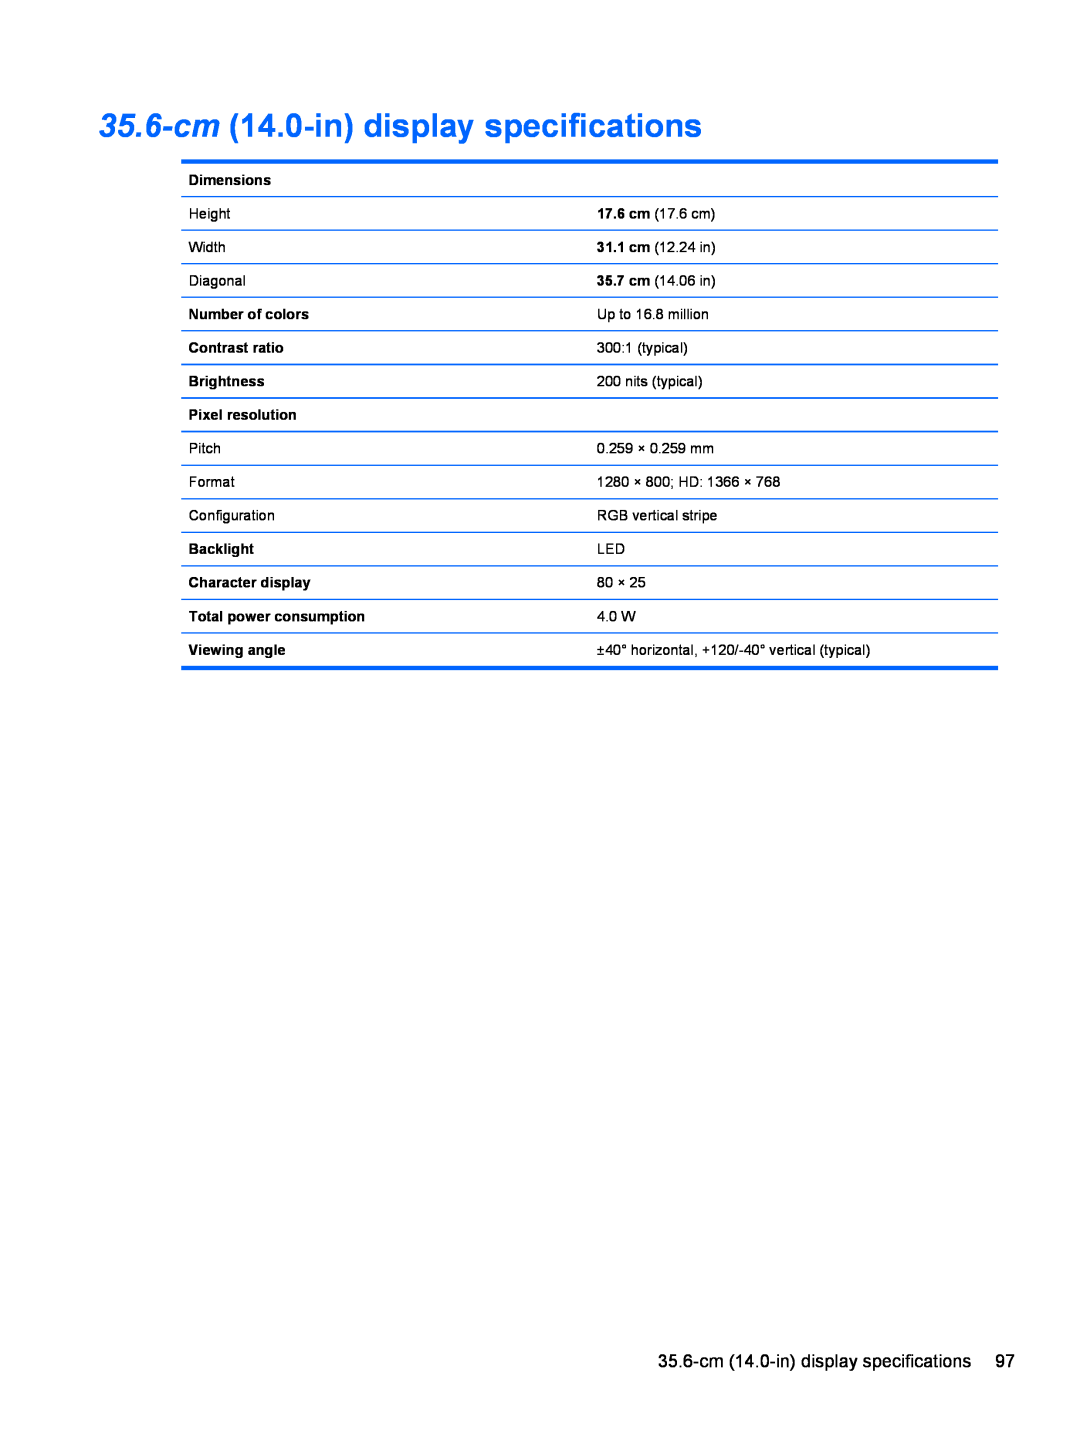 Compaq CQ42 manual 35.6-cm 14.0-in display specifications 